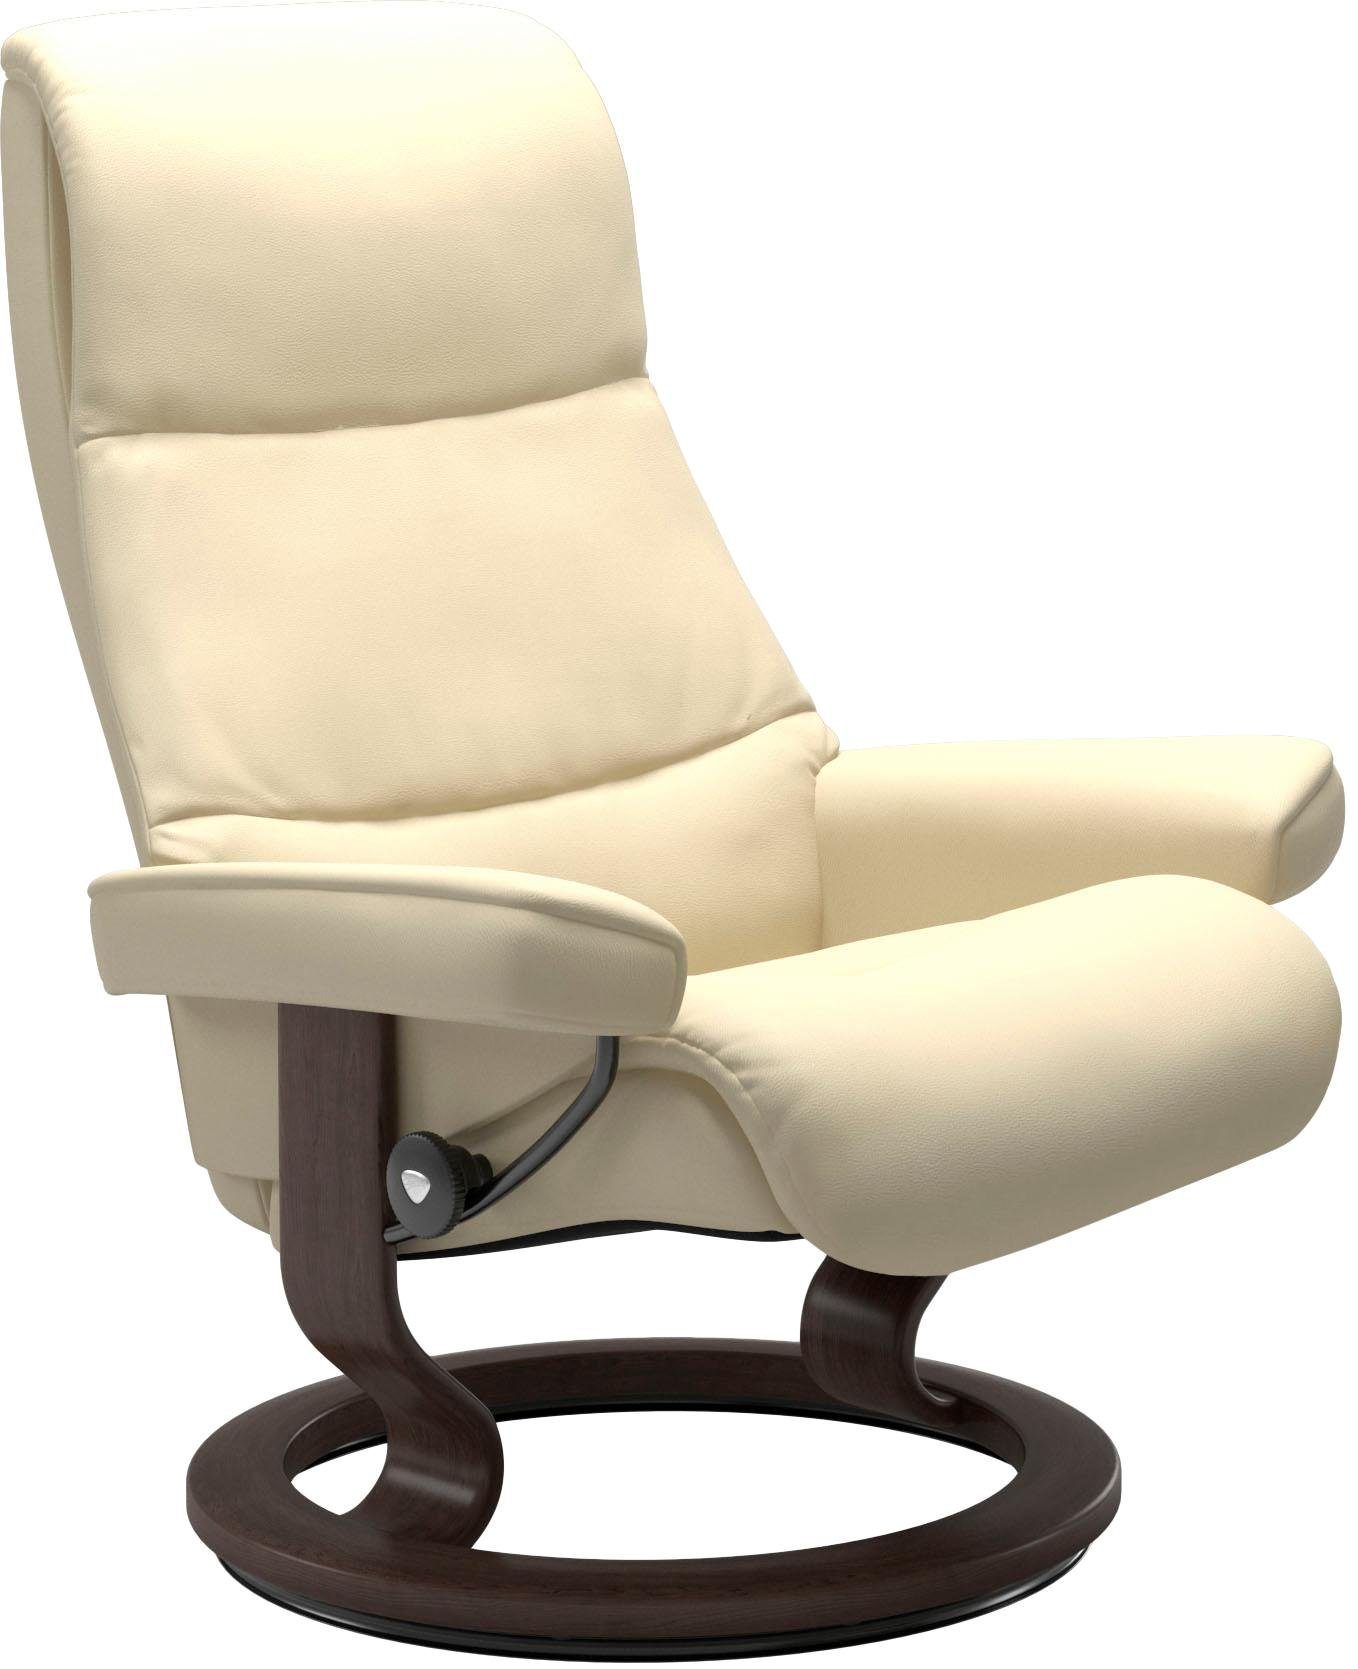 Base, Relaxsessel Stressless® View, mit Classic Wenge Größe M,Gestell